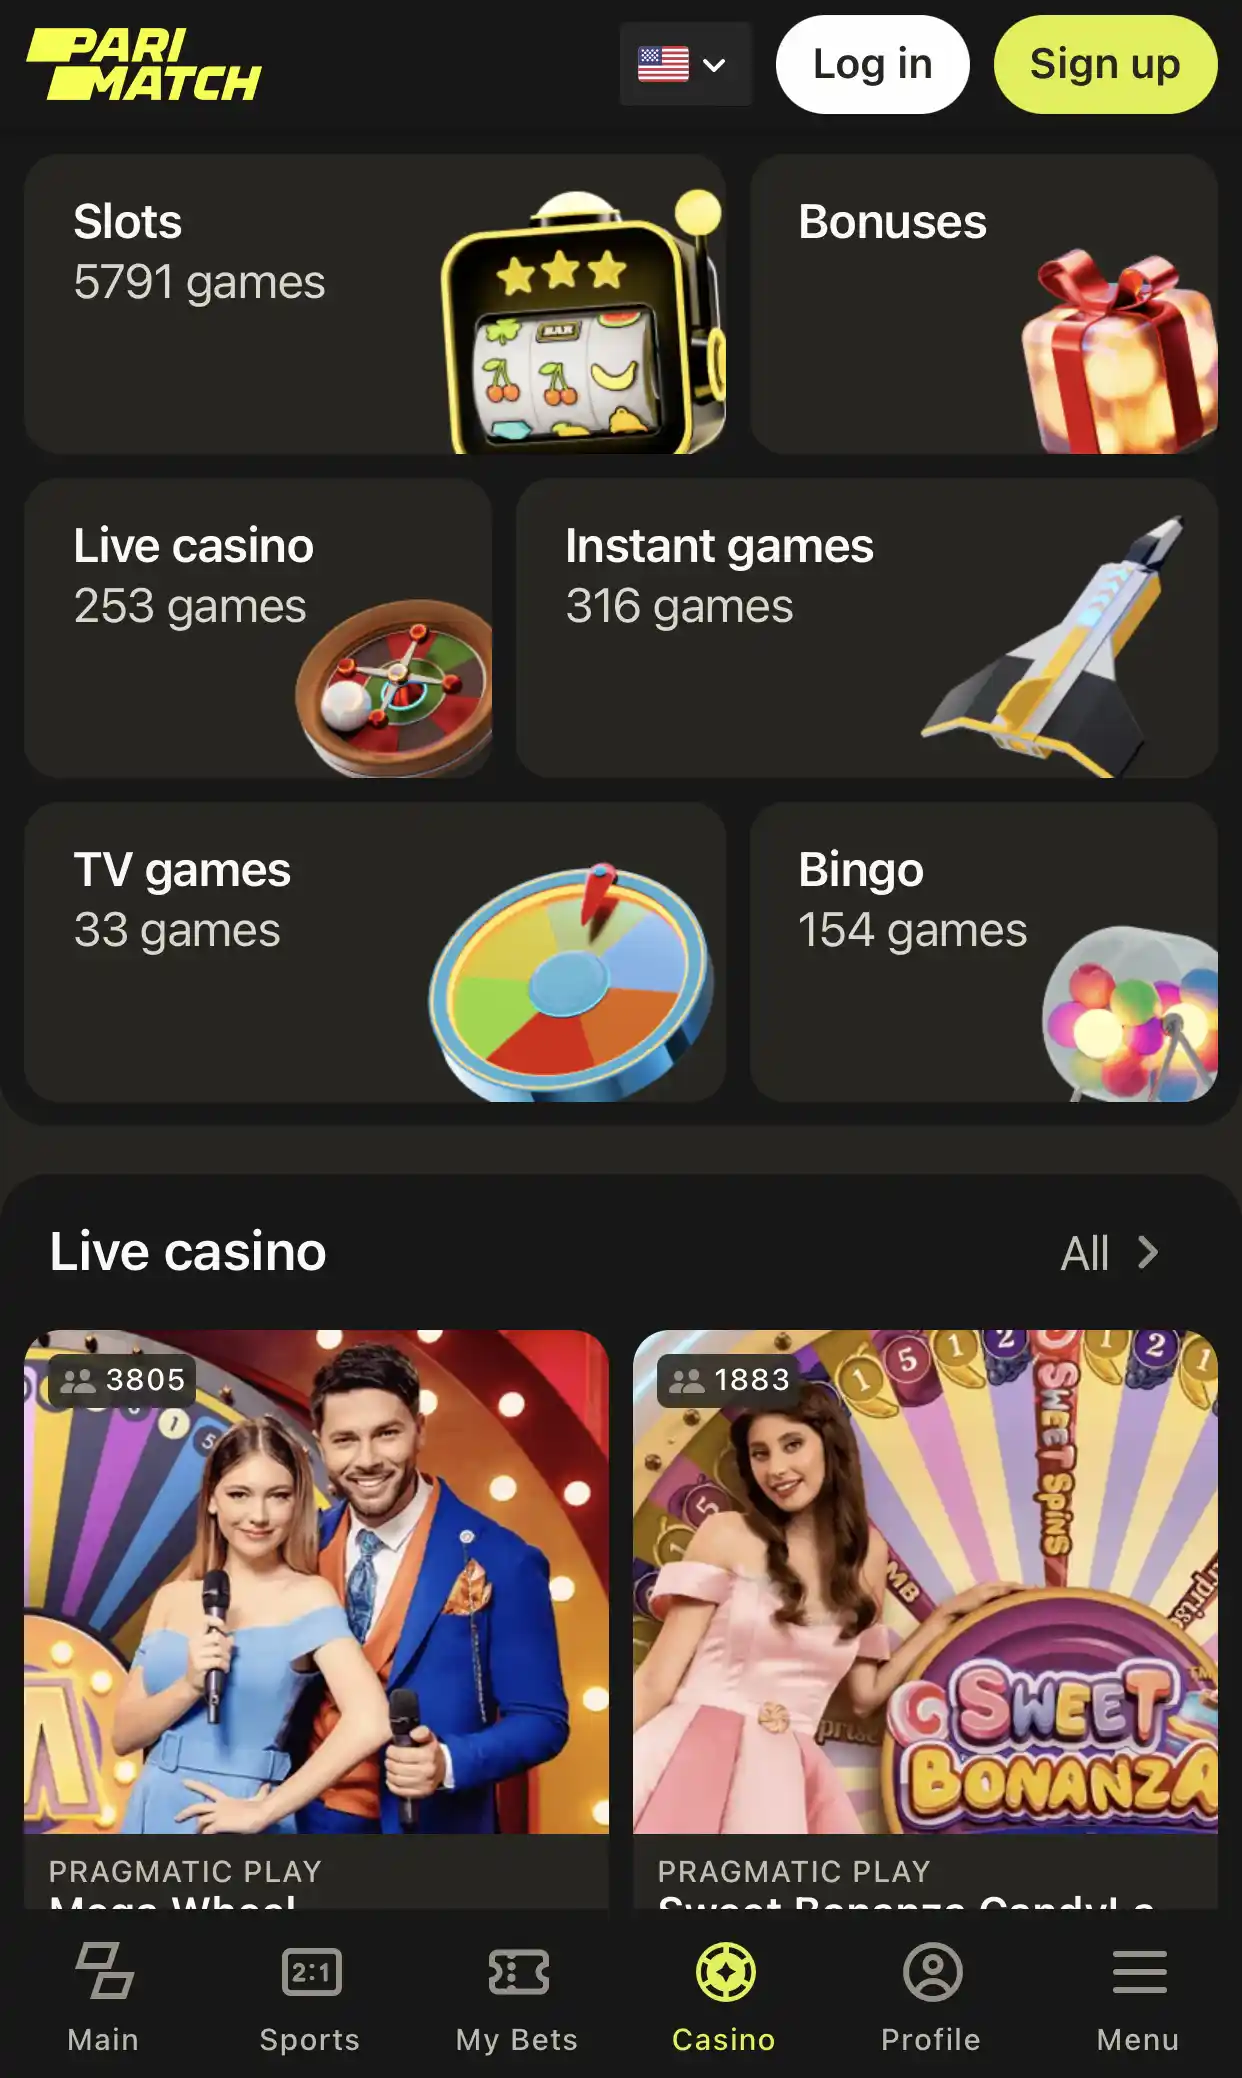 Use the user-friendly interface of Parimatch Casino and find the right section in seconds.